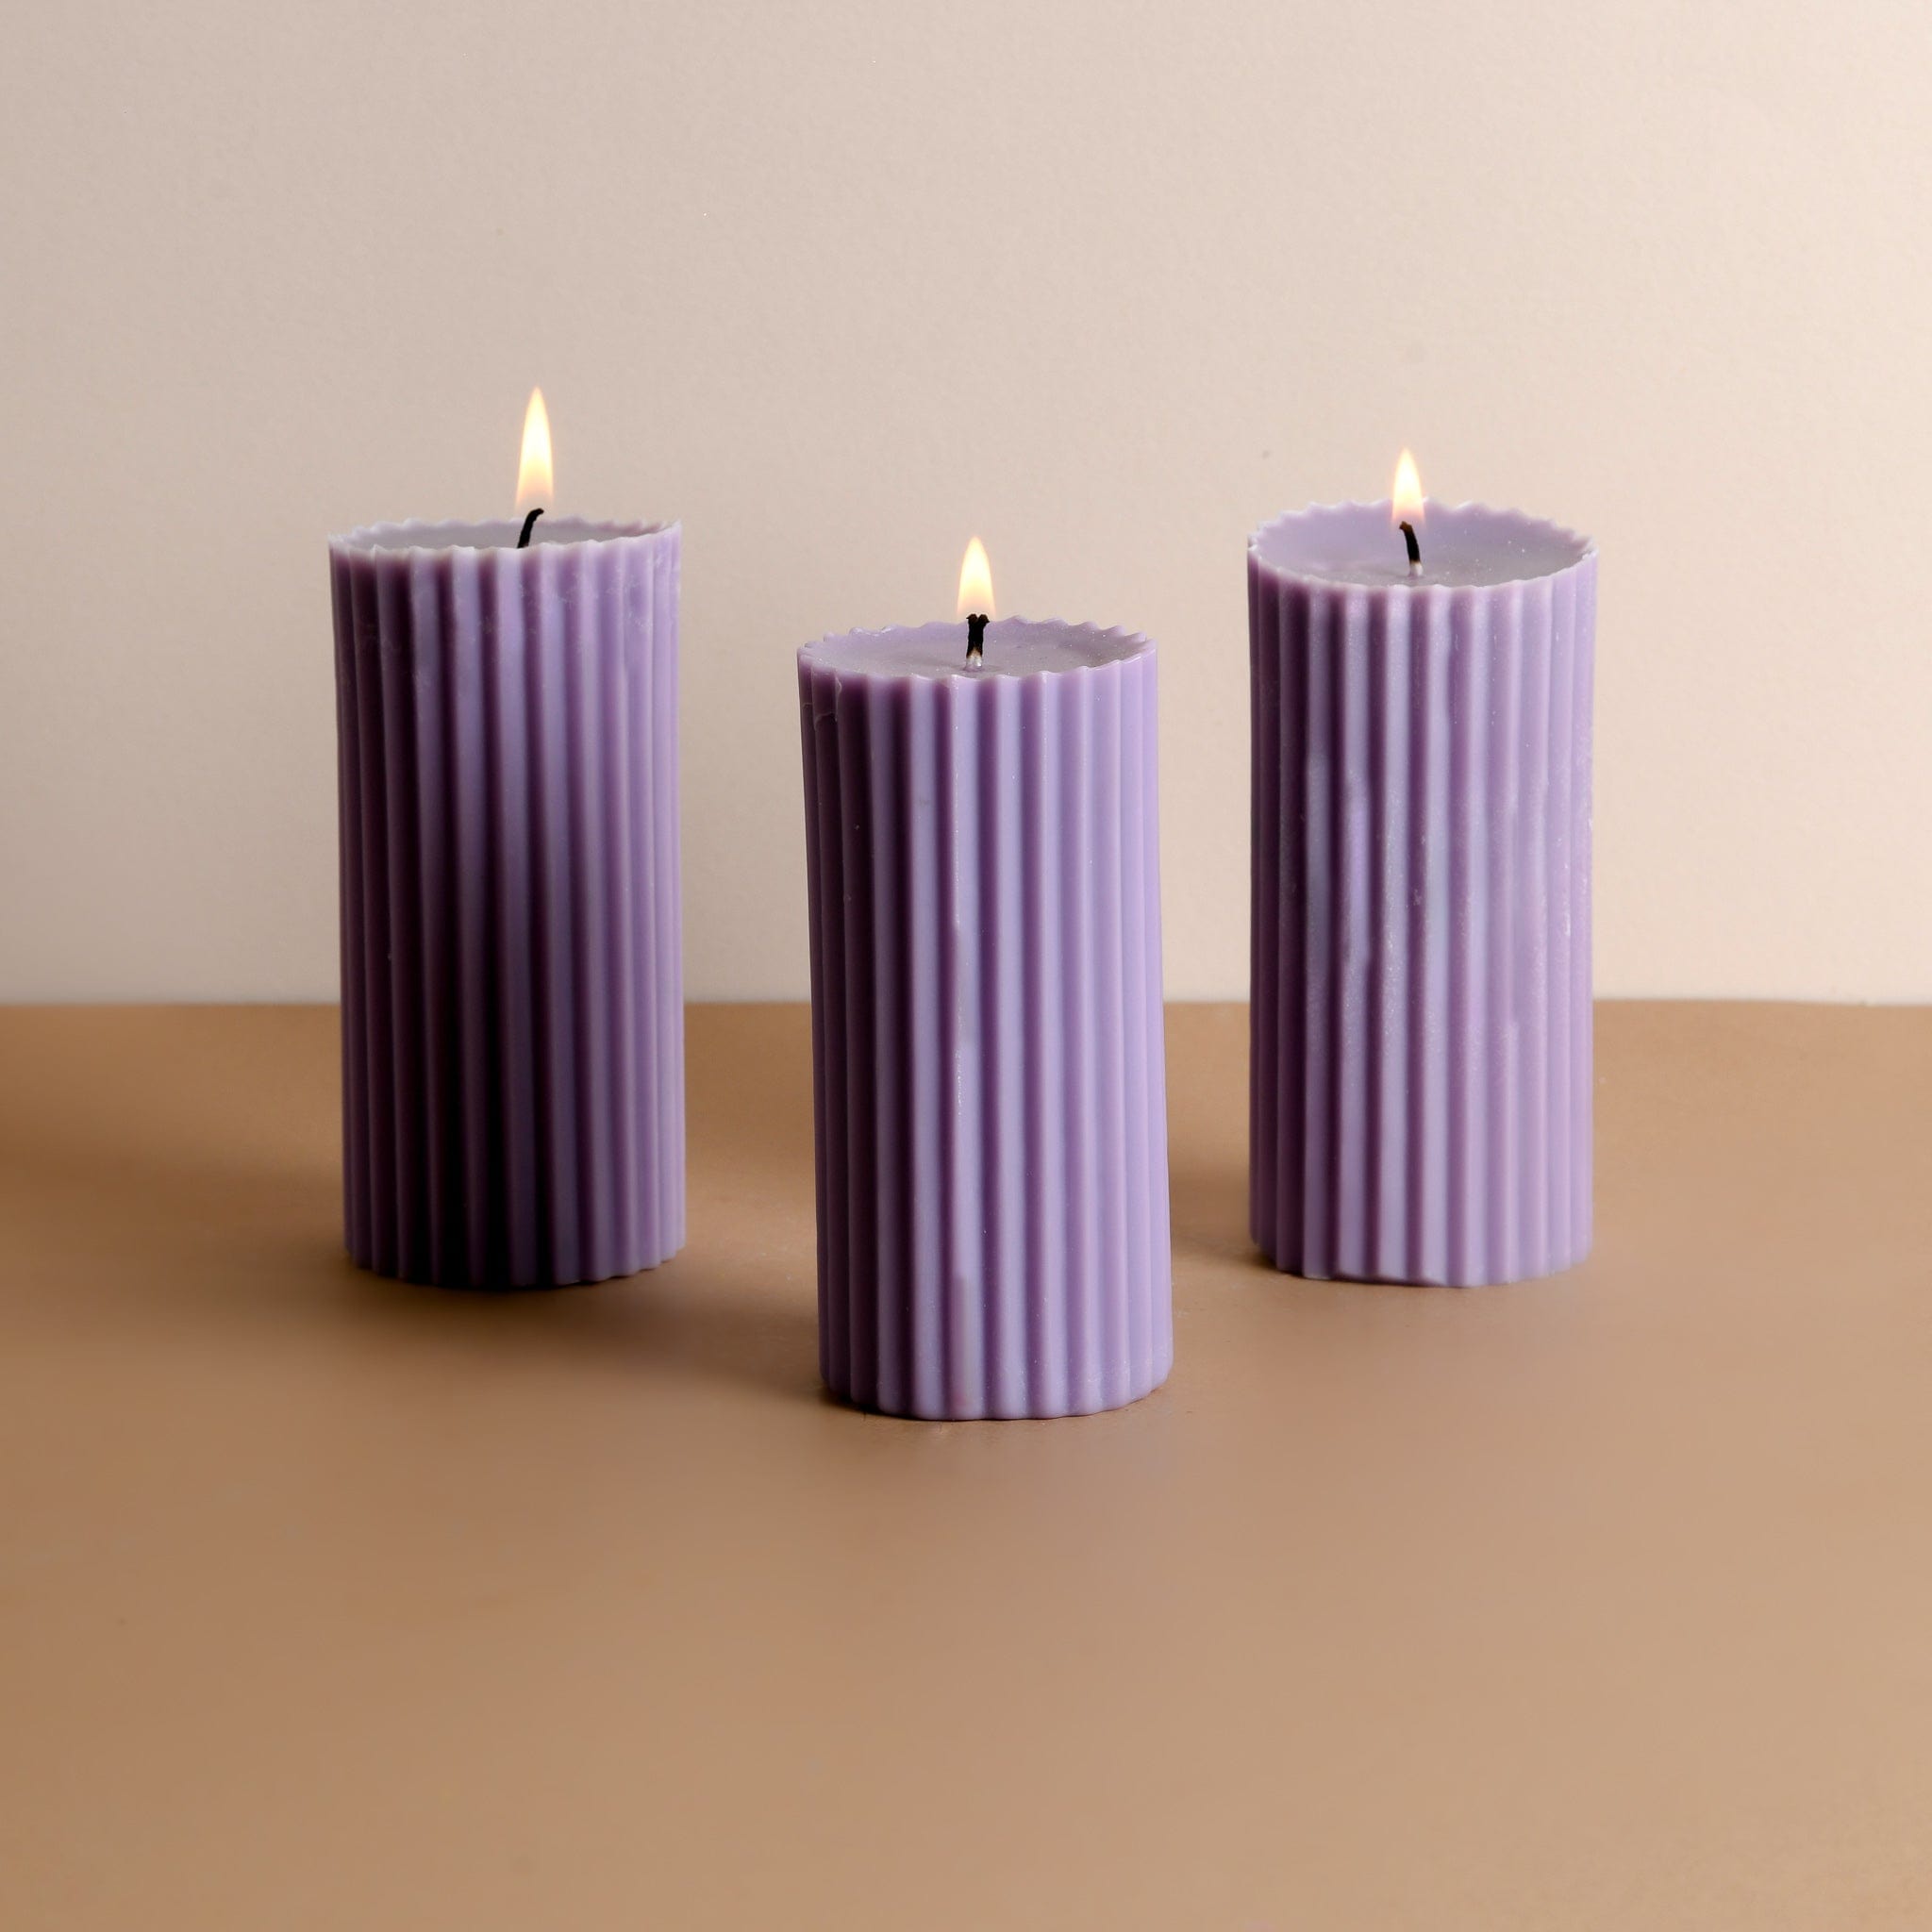 Combo of 3 Chocolate Brown 'Belief' Candles - Tarte au Chocolat Scented